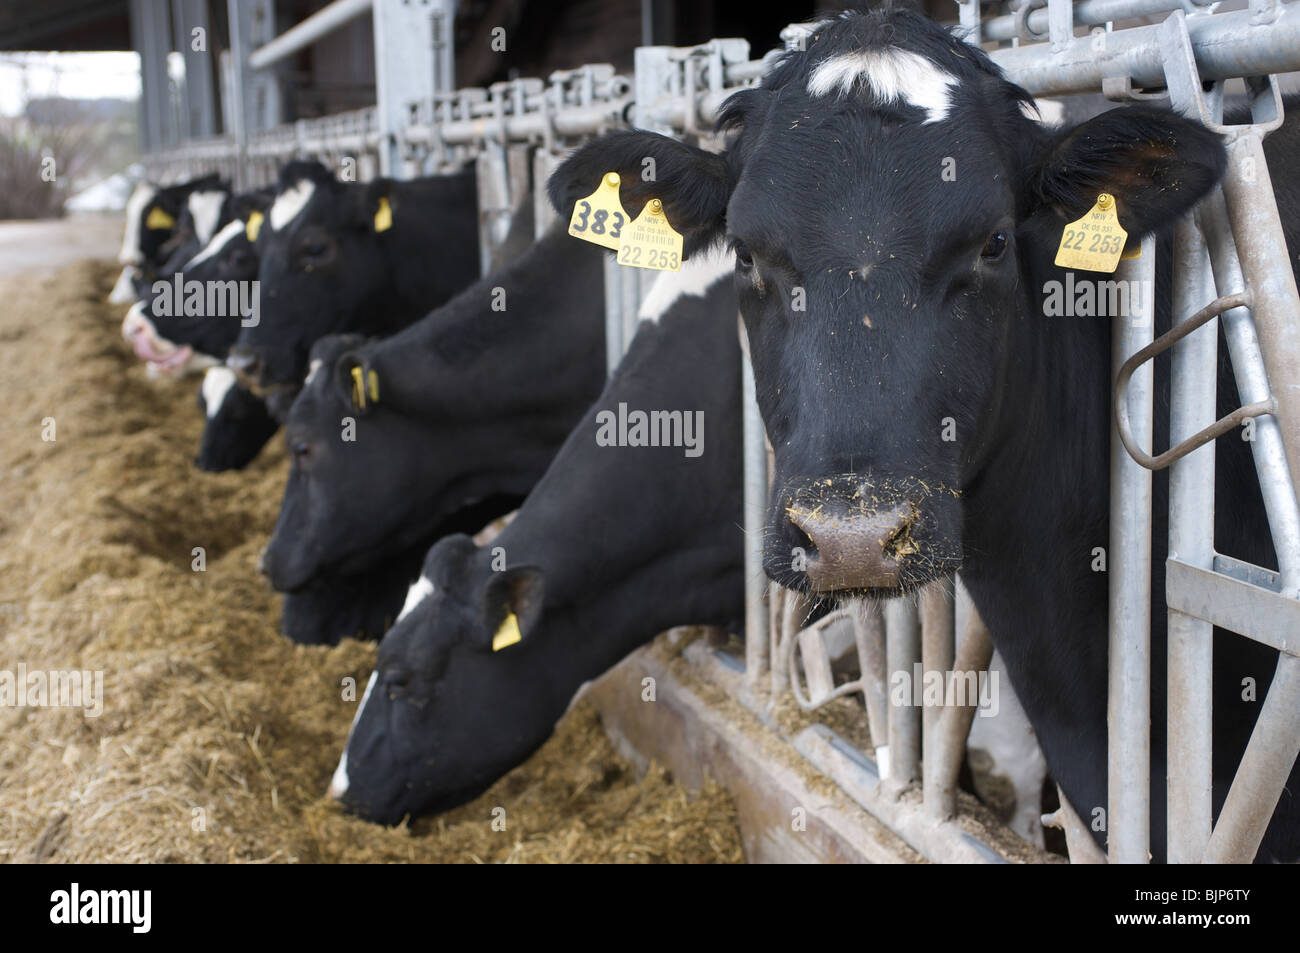 Holstein-Friesian dairy cattle on a farm in Germany. Stock Photo